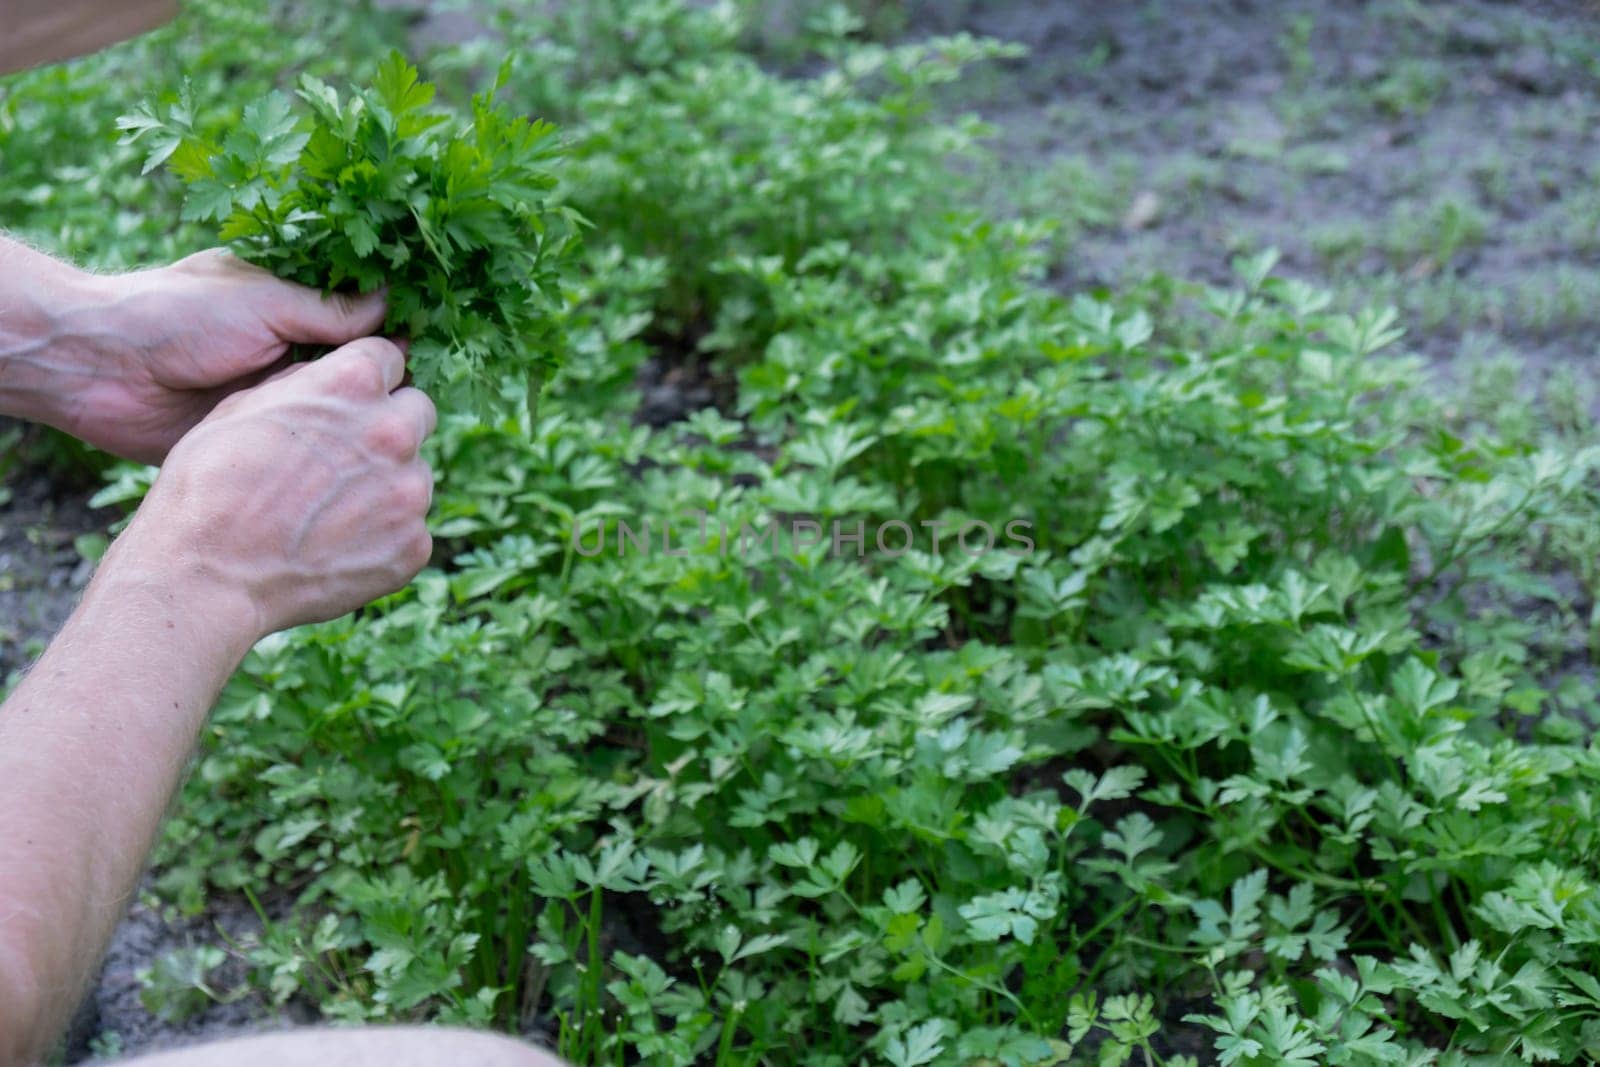 Man hands harvesting green herbs in outdoor garden. Concept of healthy eating homegrown greenery vegetables. Seasonal countryside cottage core life. Farm produce